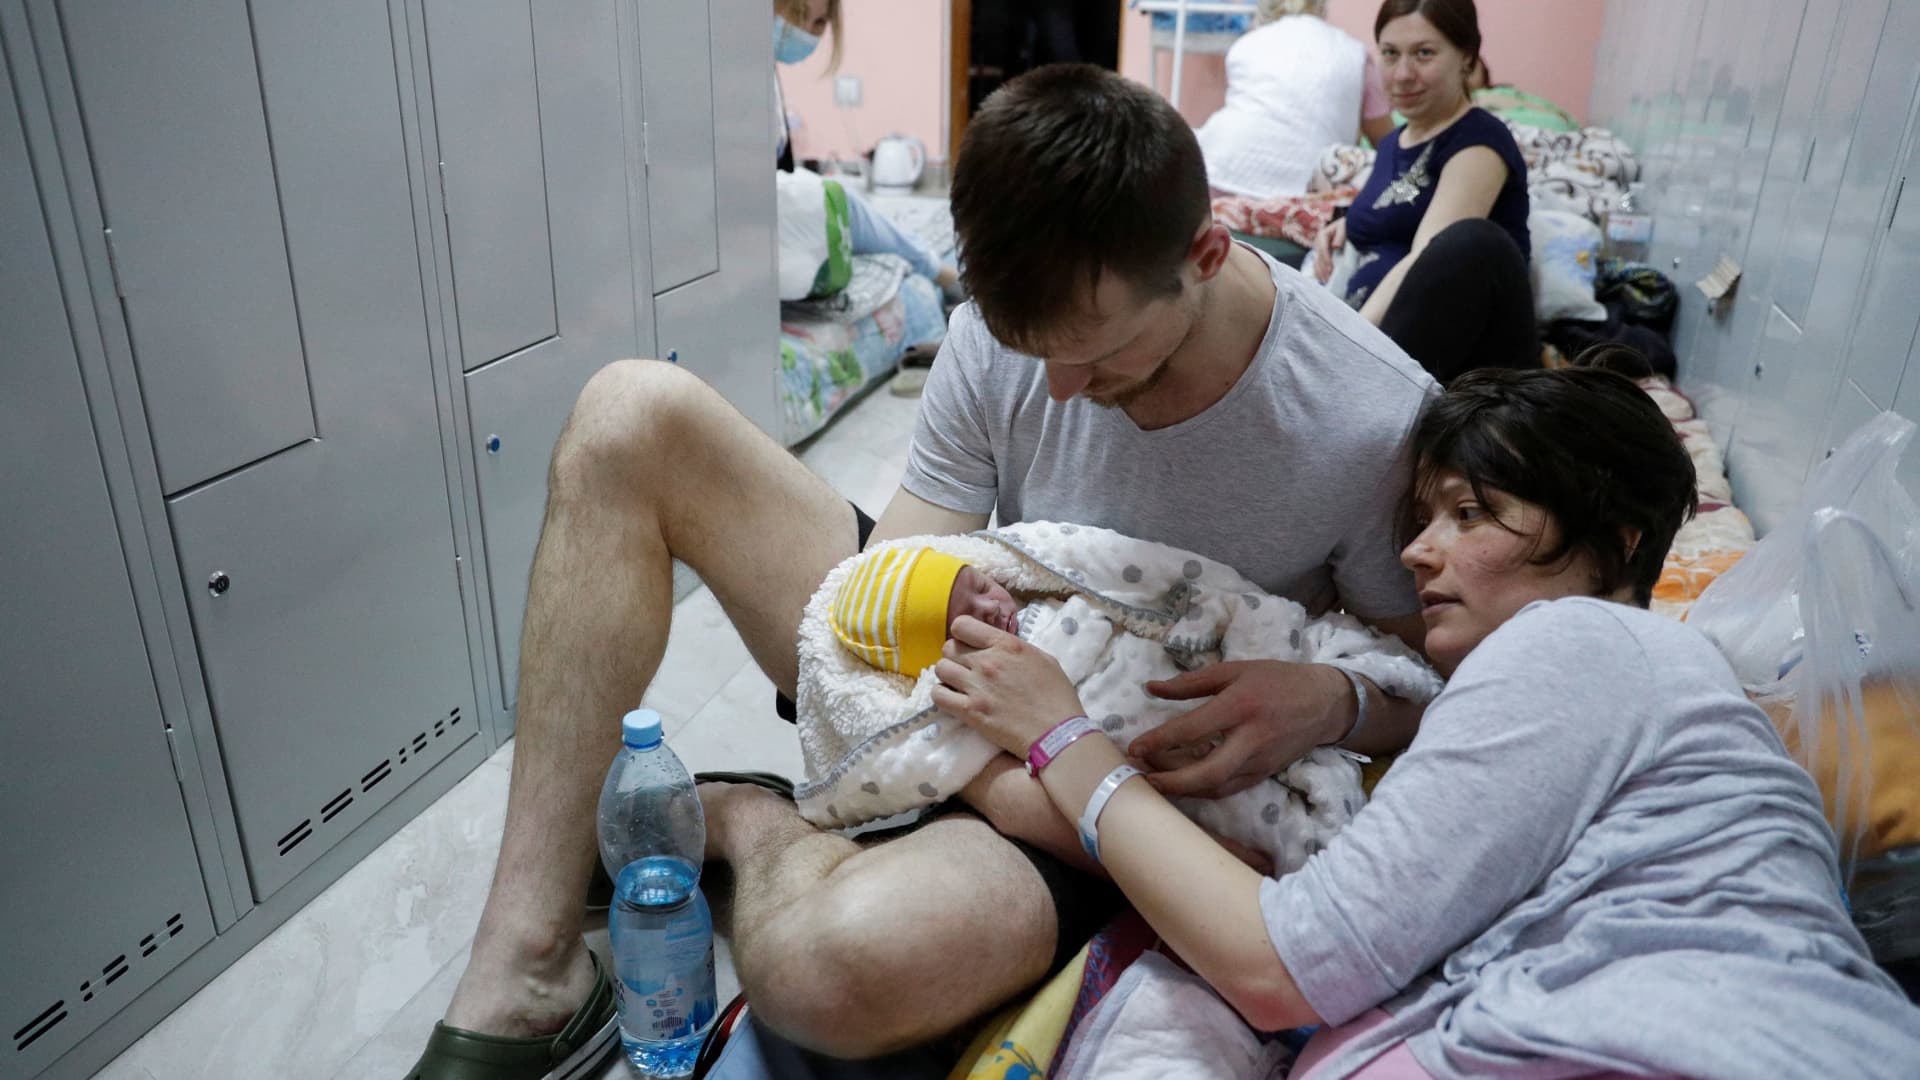 A couple with their newborn baby take shelter in the basement of a perinatal centre as air raid siren sounds are heard amid Russia's invasion of Ukraine, in Kyiv, Ukraine, March 2, 2022.